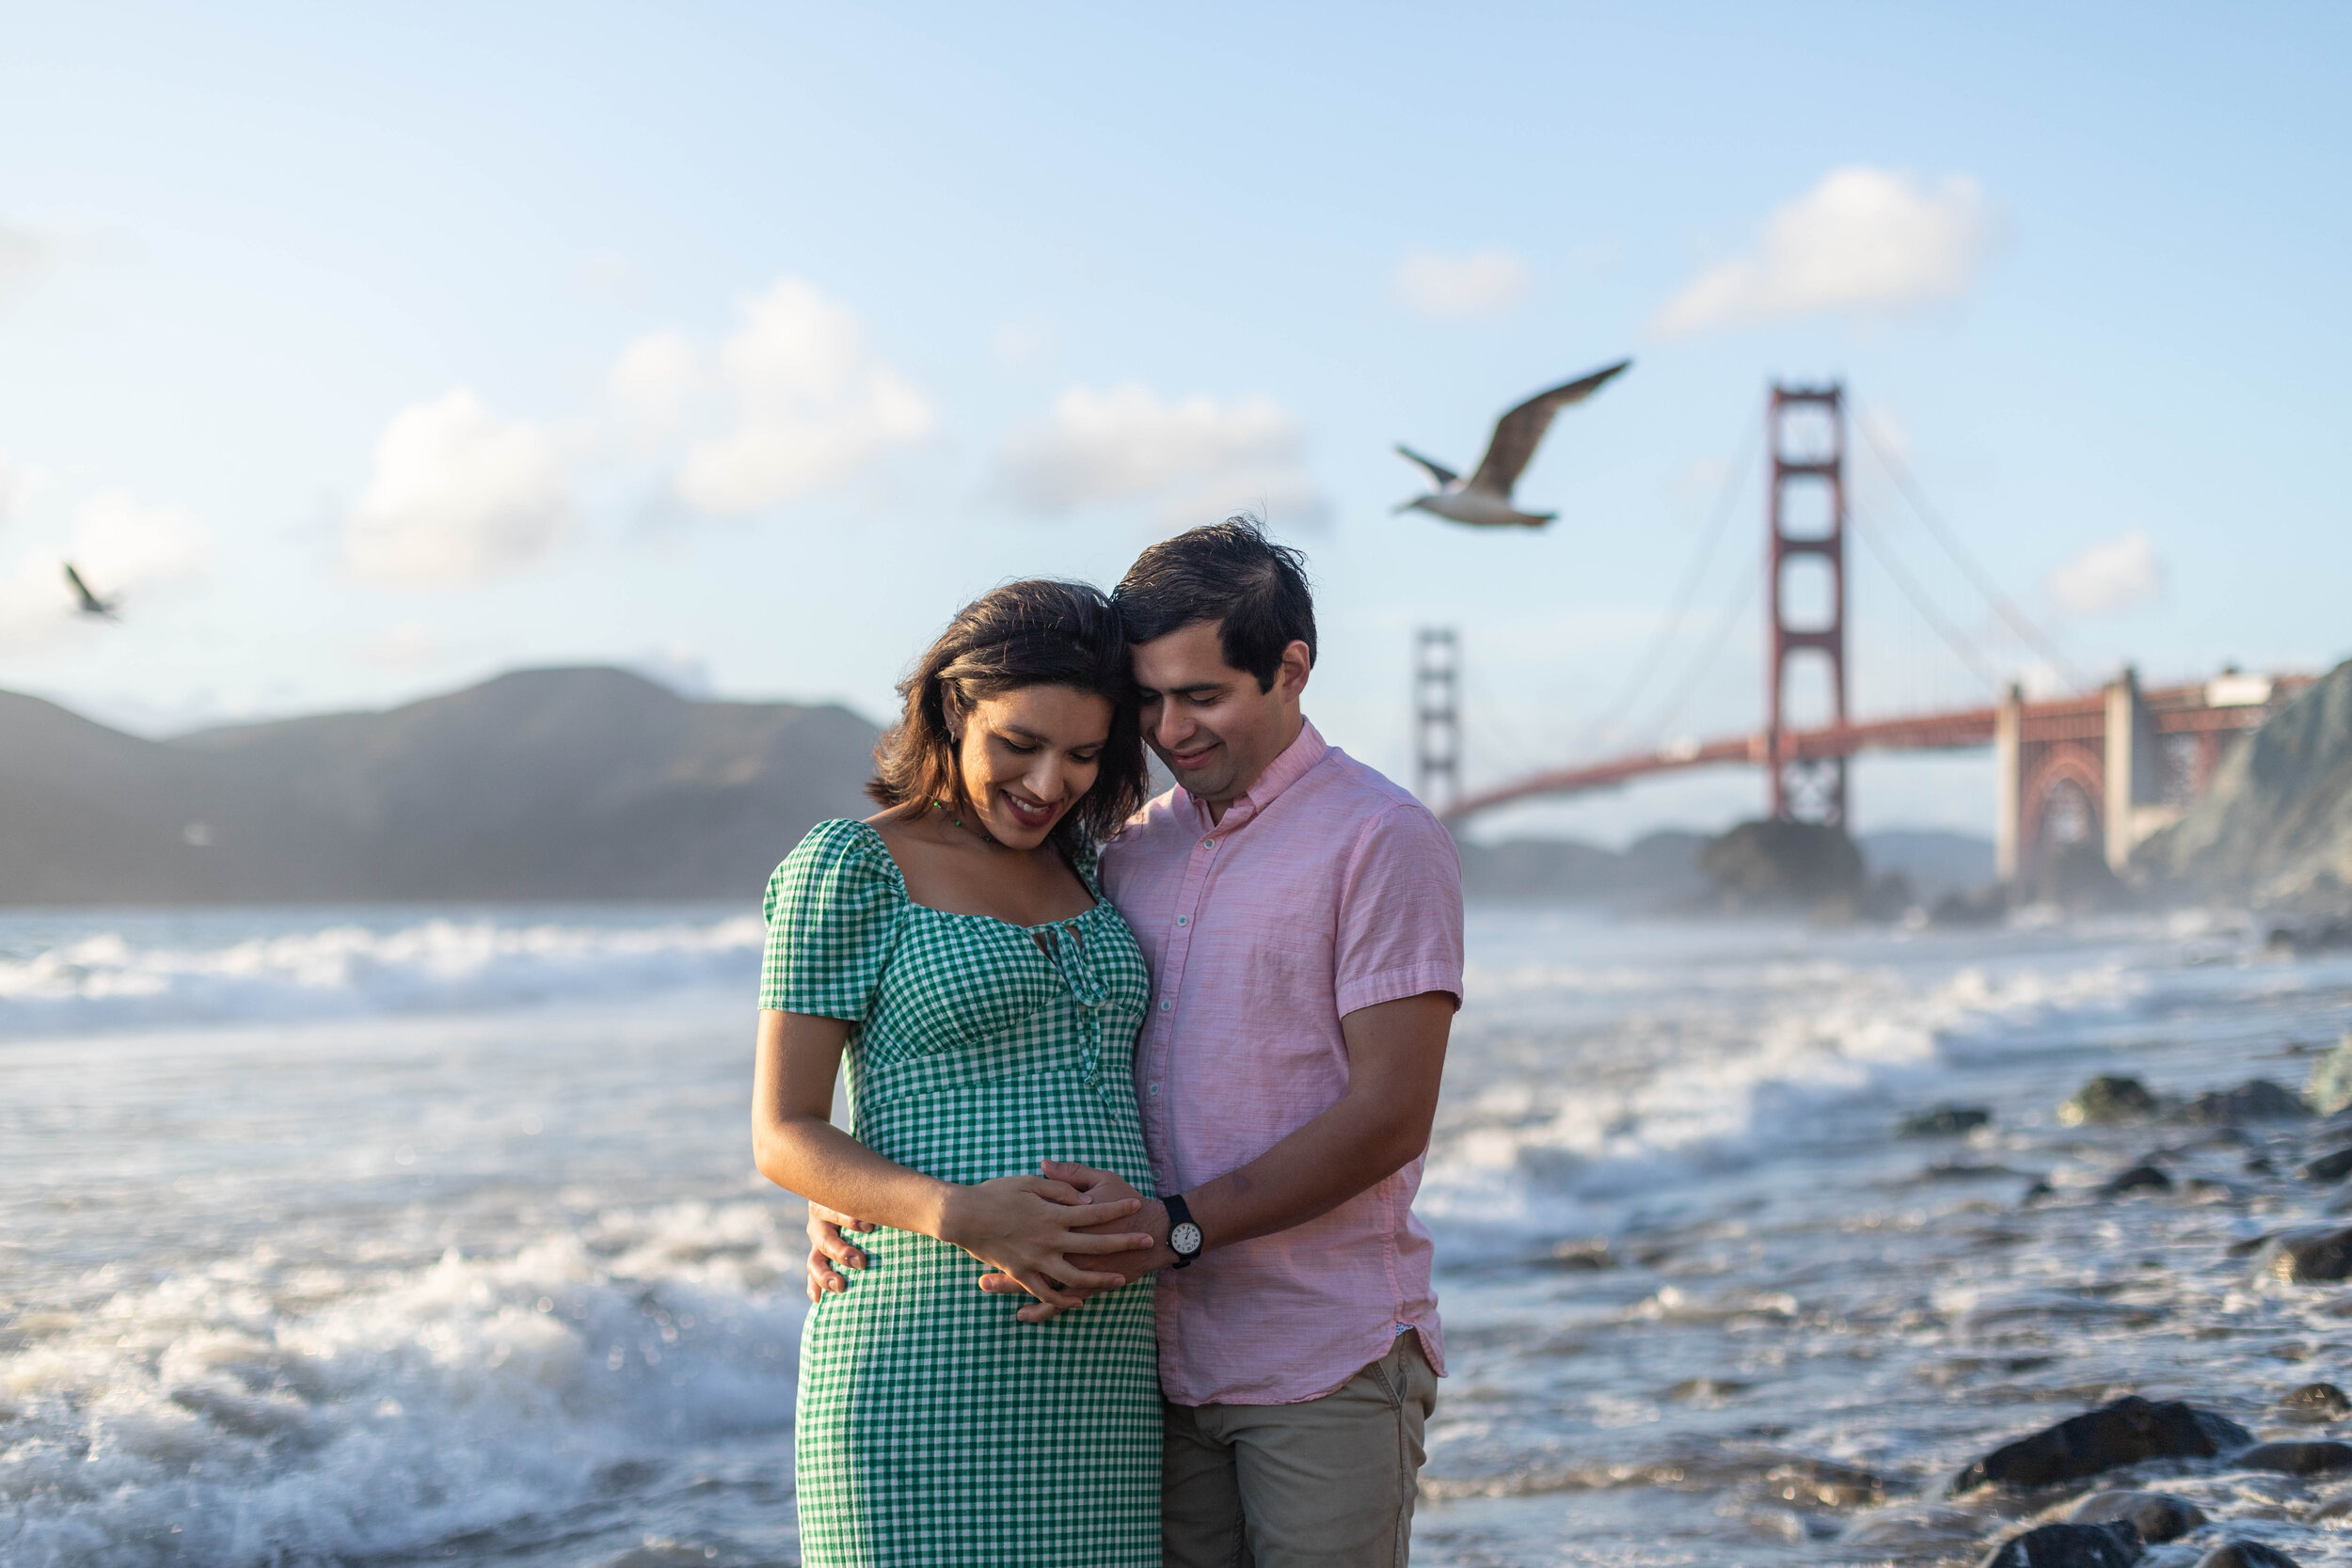  Pregnant couple standing together in front of Golden Gate Bridge with seagulls flying in the background. Couple looking down at woman’s pregnant belly while caressing it with their hands. 